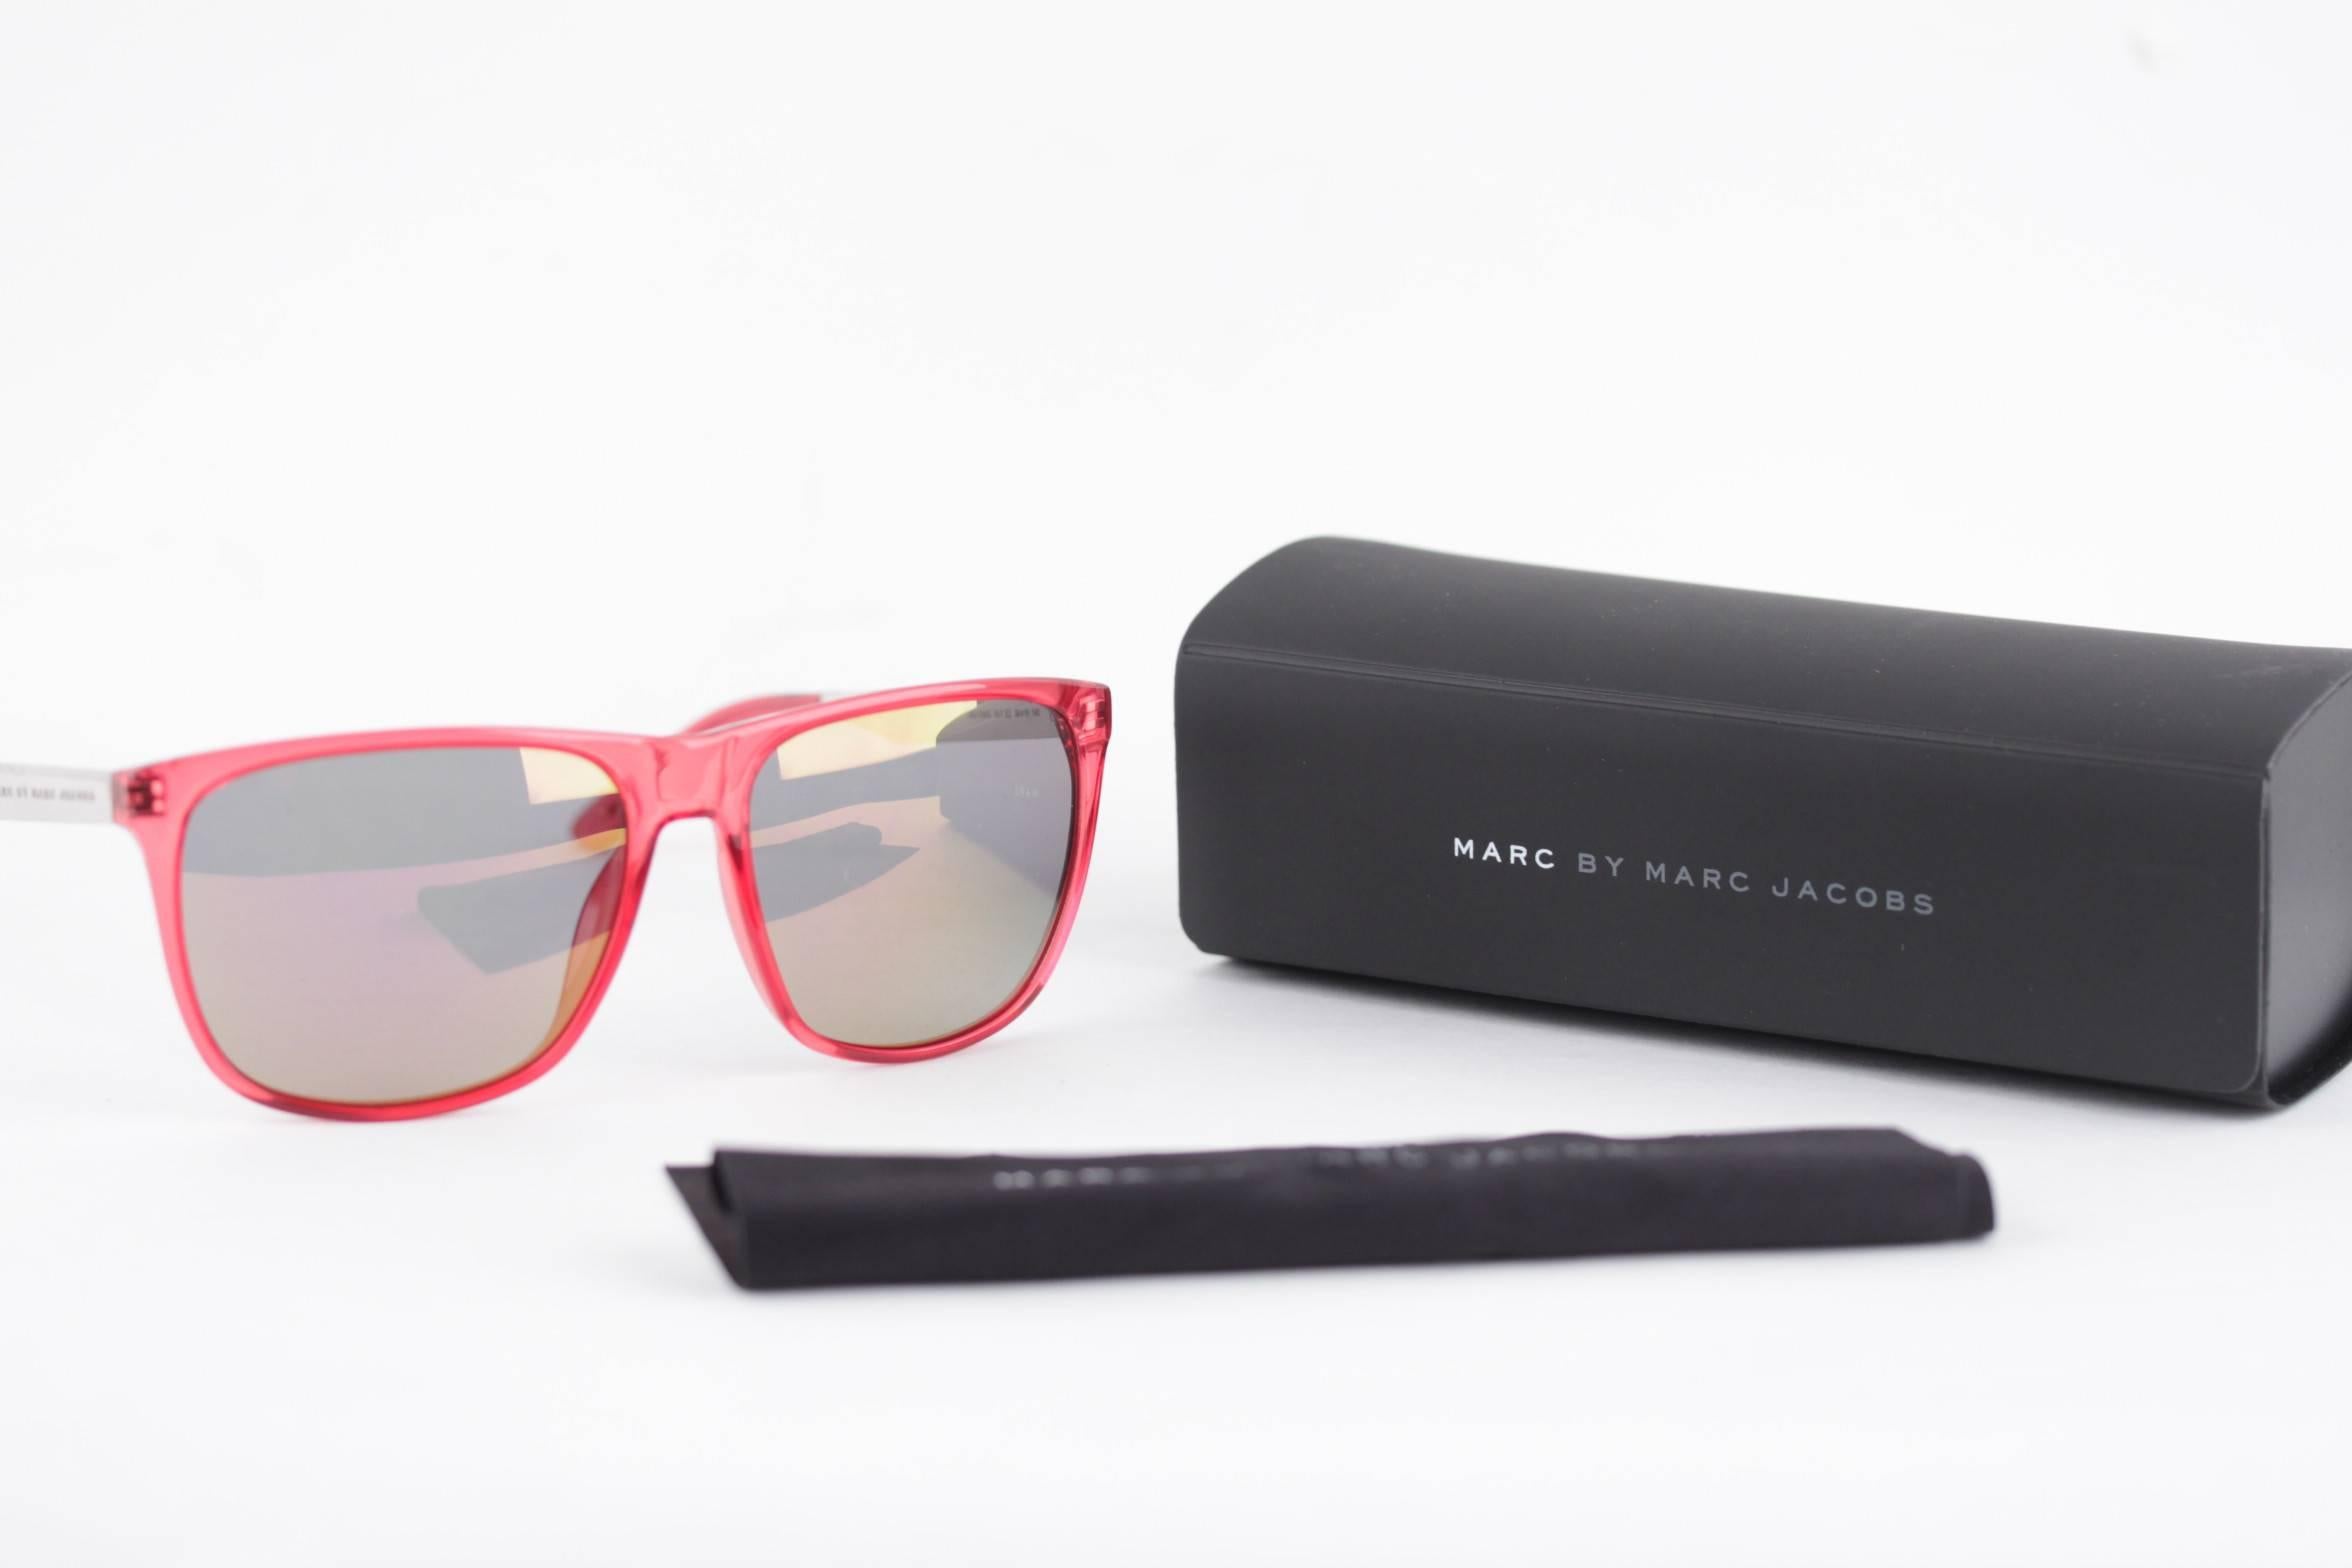 - Marc by Marc Jacobs MMJ 409S sunglasses
- Red semi-transparent plastic front and silver metal Temples
- Original half-mirrored 100% UV Protection lens
- 'Marc by Marc Jacobs' emobossed on the temple
- Original MARC by MARC JACOBS case and